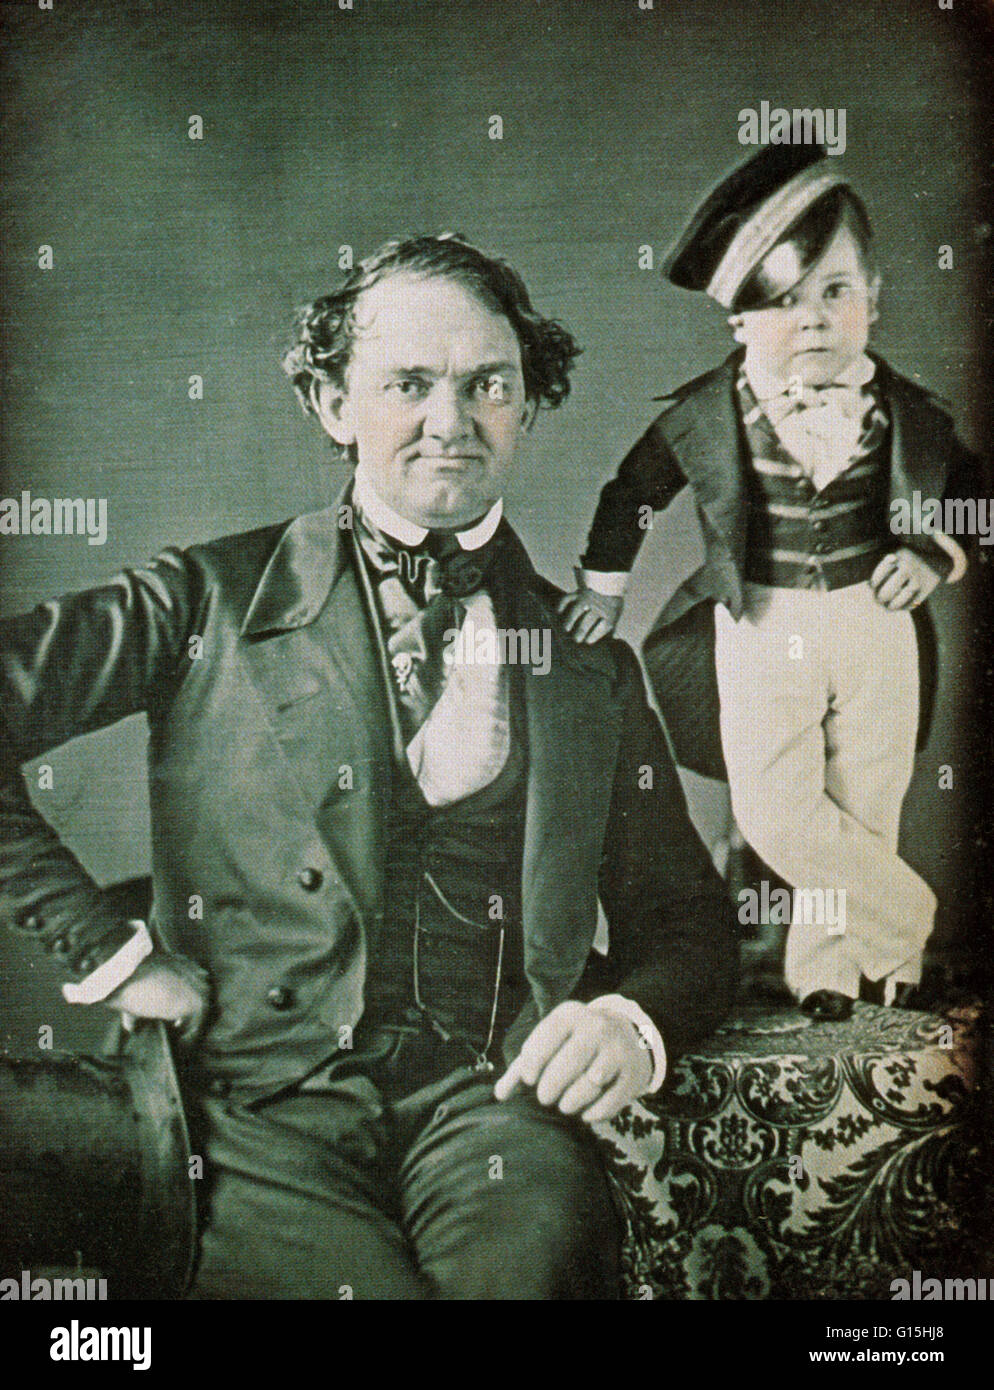 P.T. Barnum (1810-1891) and General Tom Thumb (stage name of Charles Sherwood Stratton (1838-1883)). Portrait circa 1850. Barnum founded Barnum & Bailey Circus, and for many years Tom Thumb was a popular dwarf performer in the circus Stock Photo